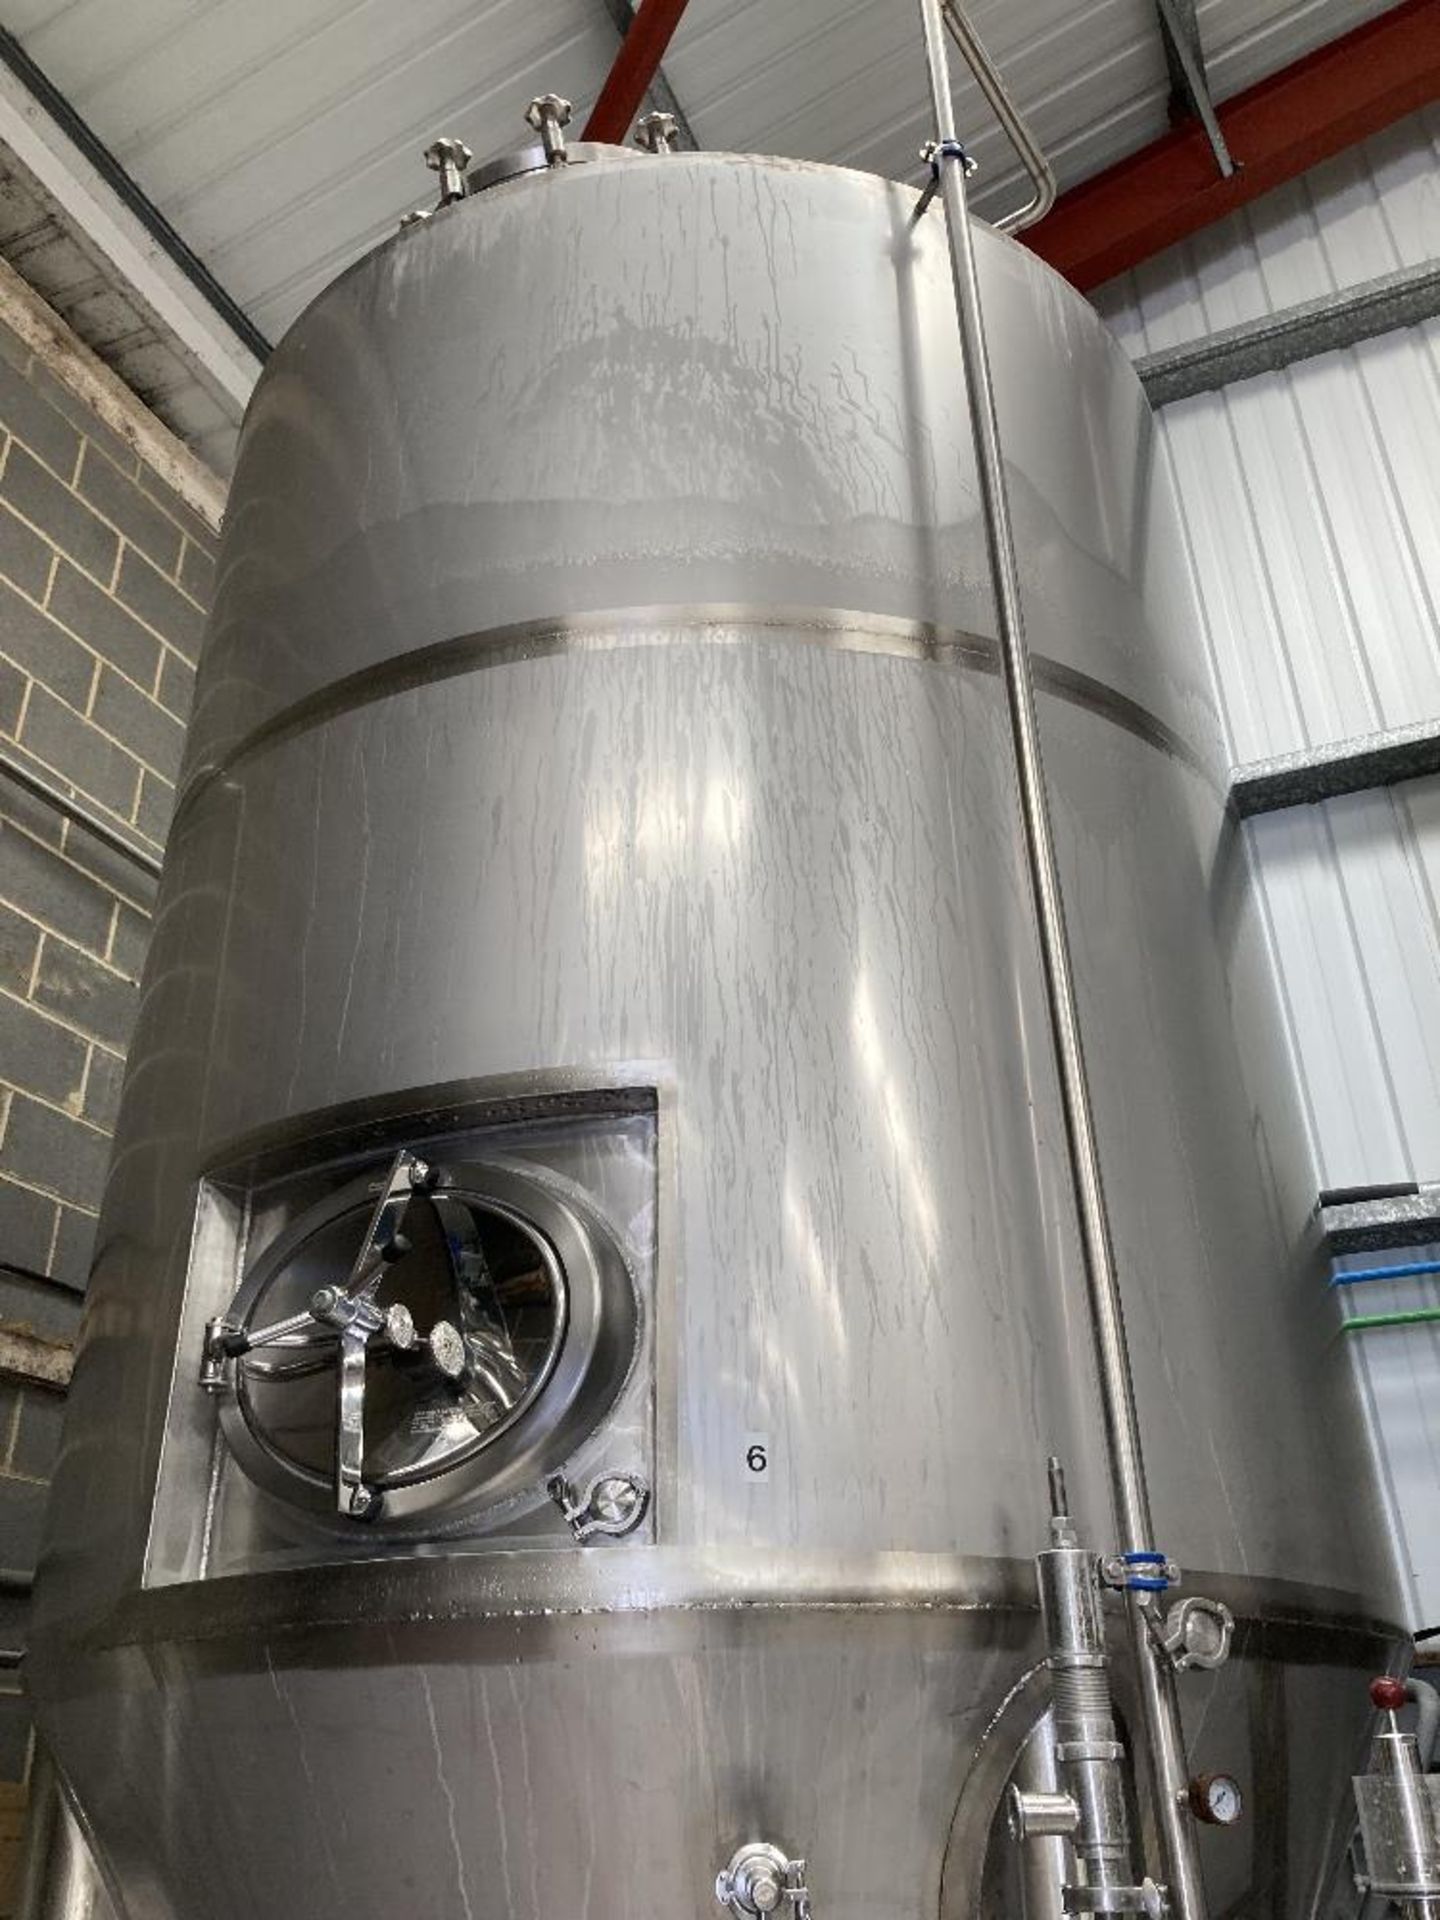 Unbranded stainless steel pressurised vertical conical vessel - Image 10 of 11